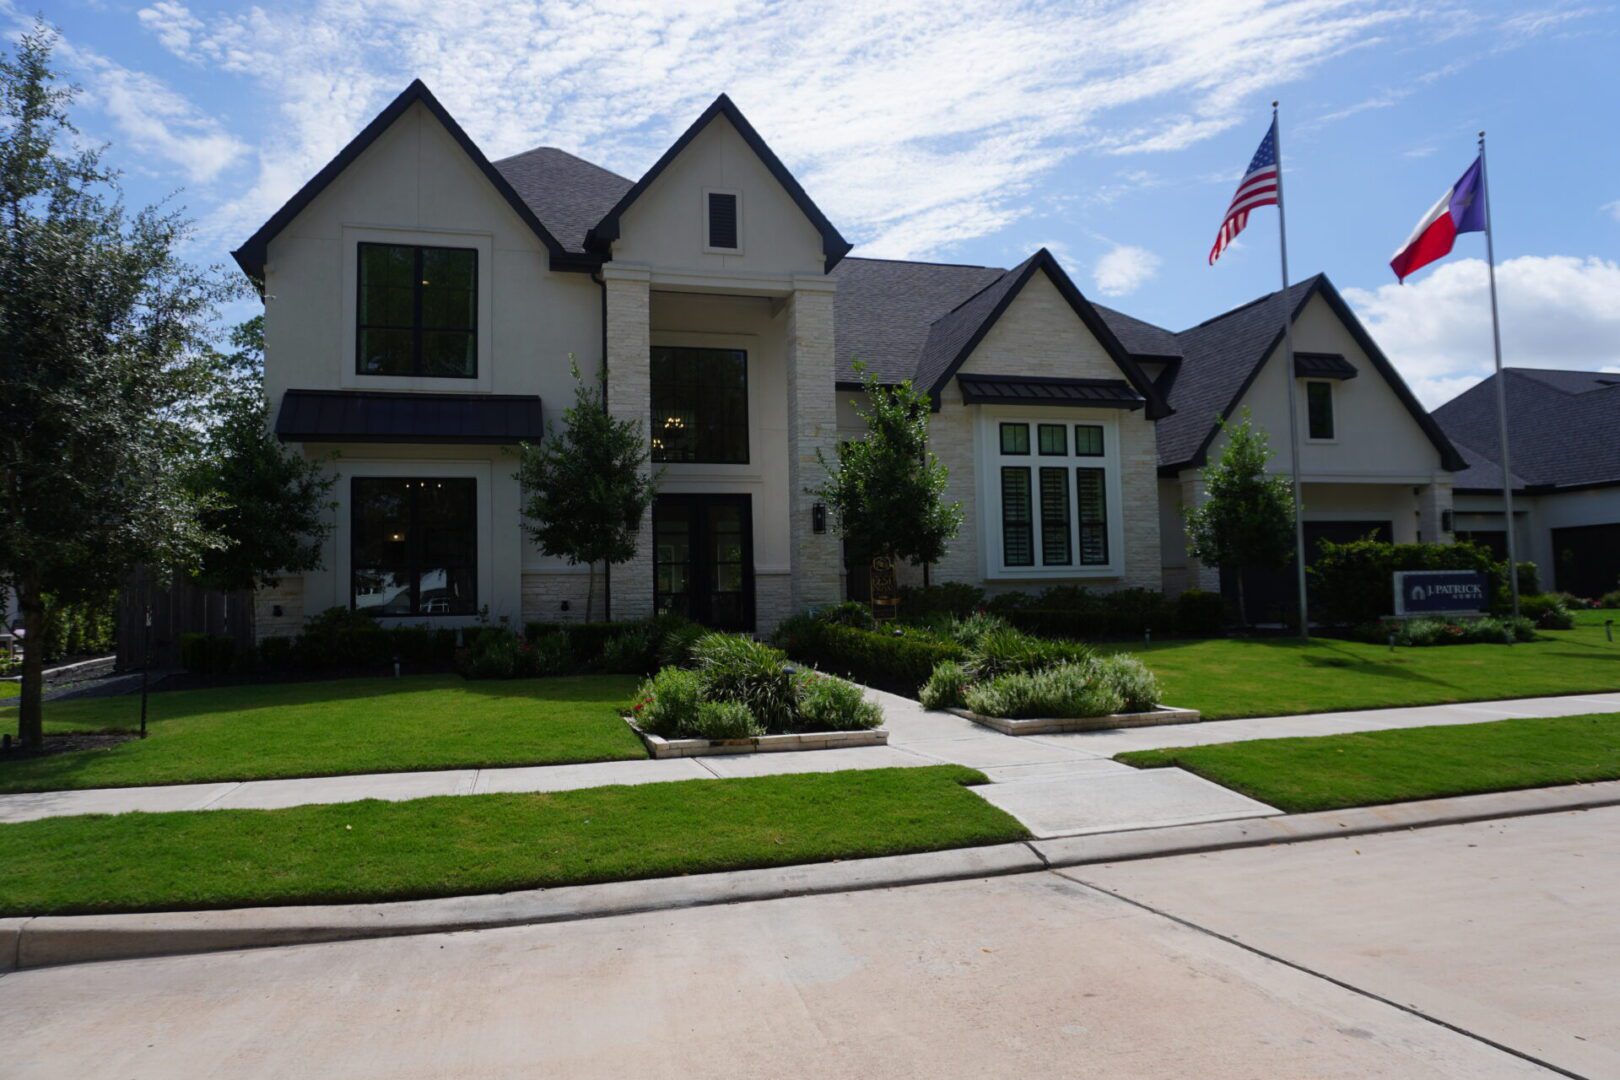 A large suburban house built by Texas builders with a well-maintained front lawn, featuring U.S. and Texas flags flying on a flagpole.